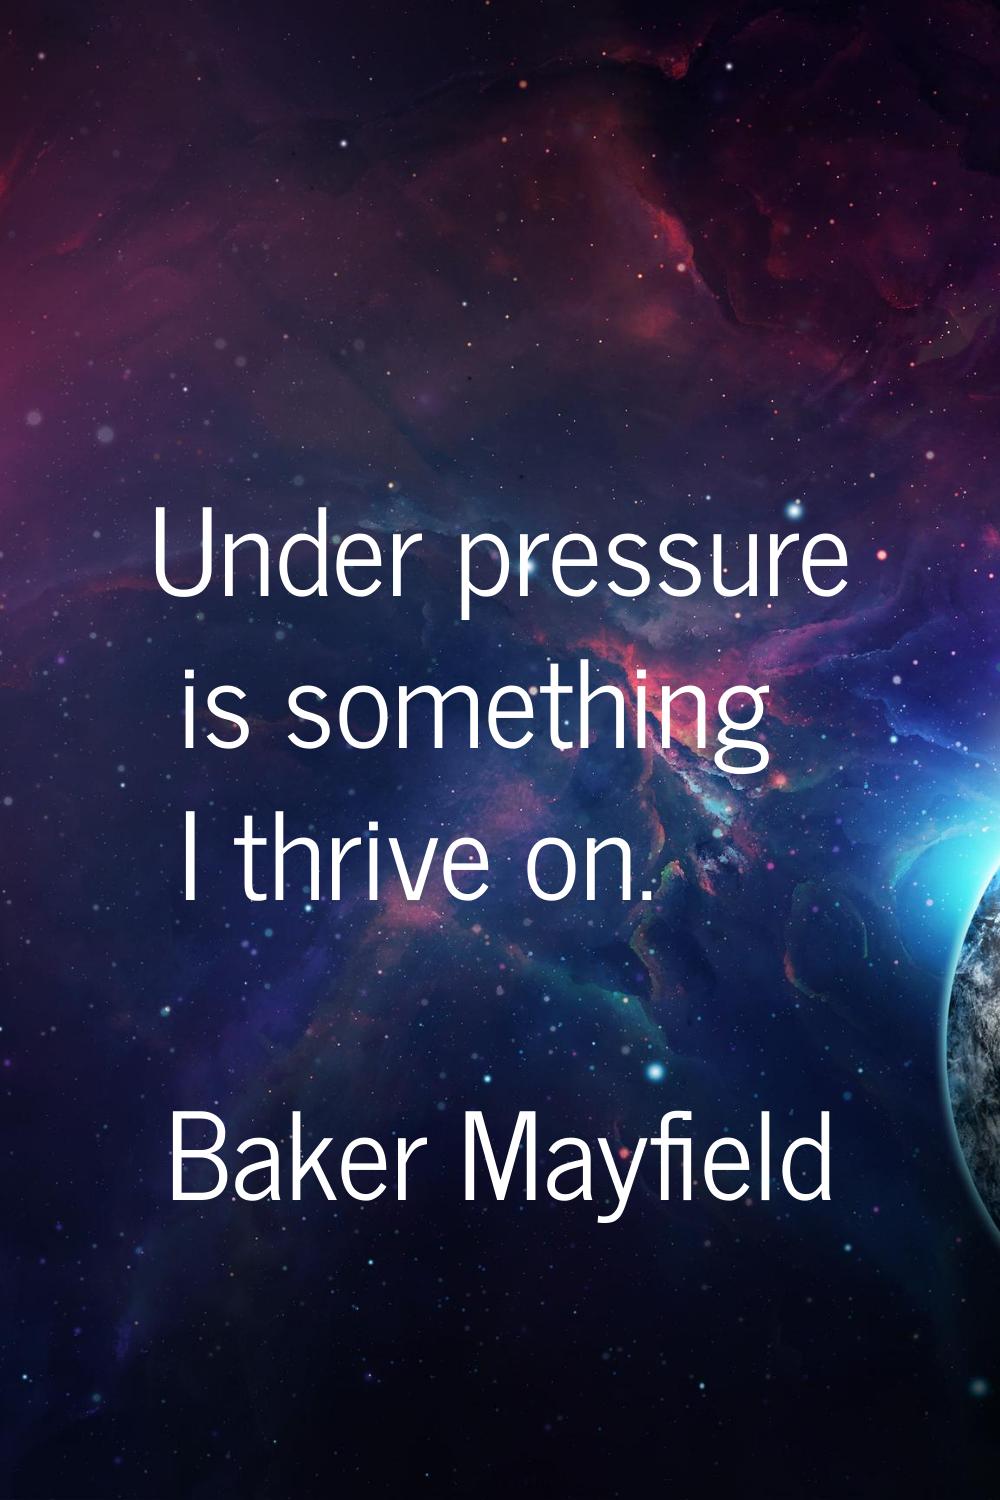 Under pressure is something I thrive on.